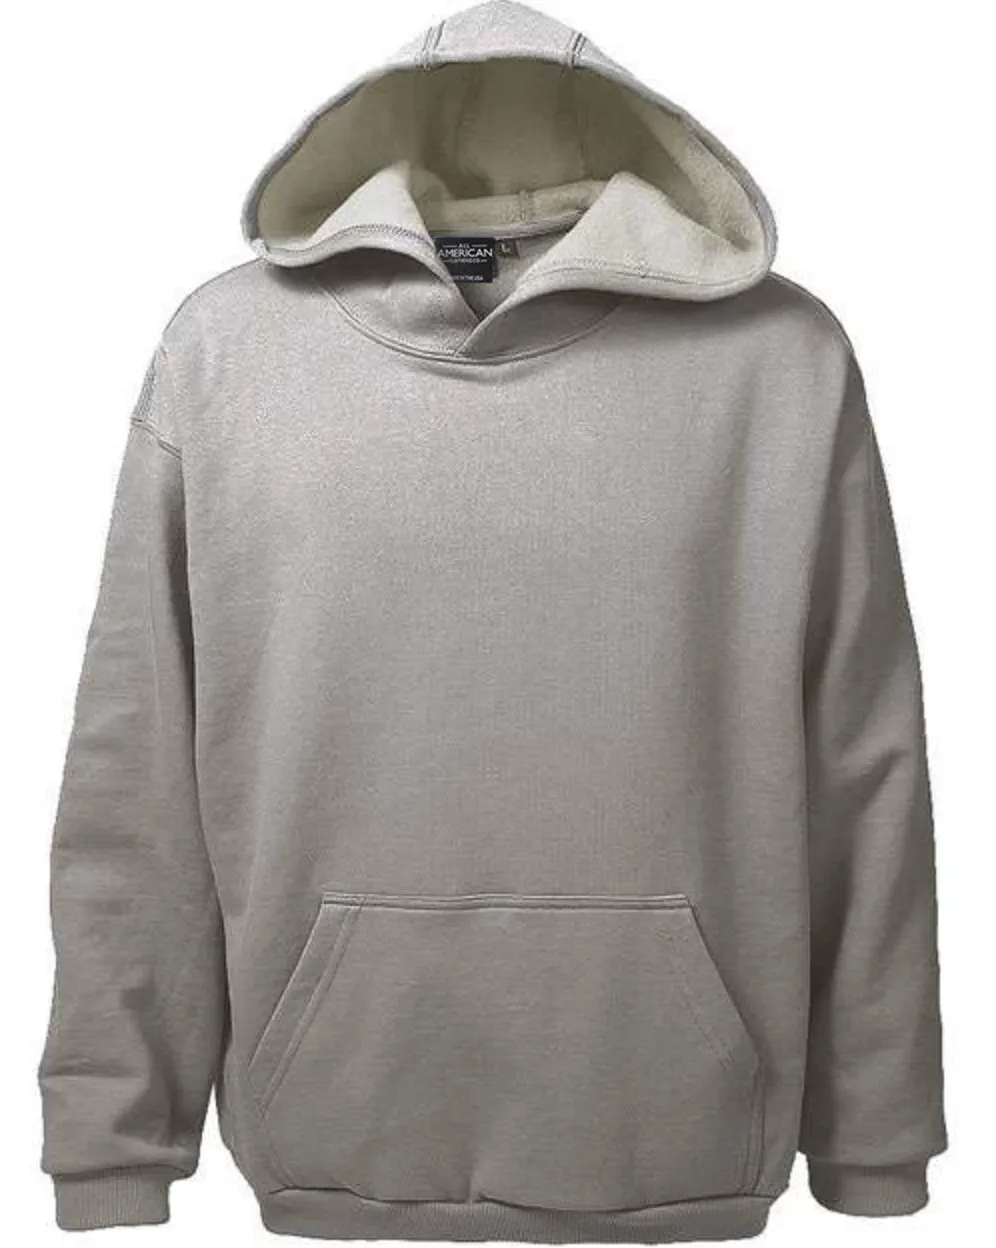 All American Clothing Co. Pullover Hoodie posted by ProdOrigin USA in Men's Apparel